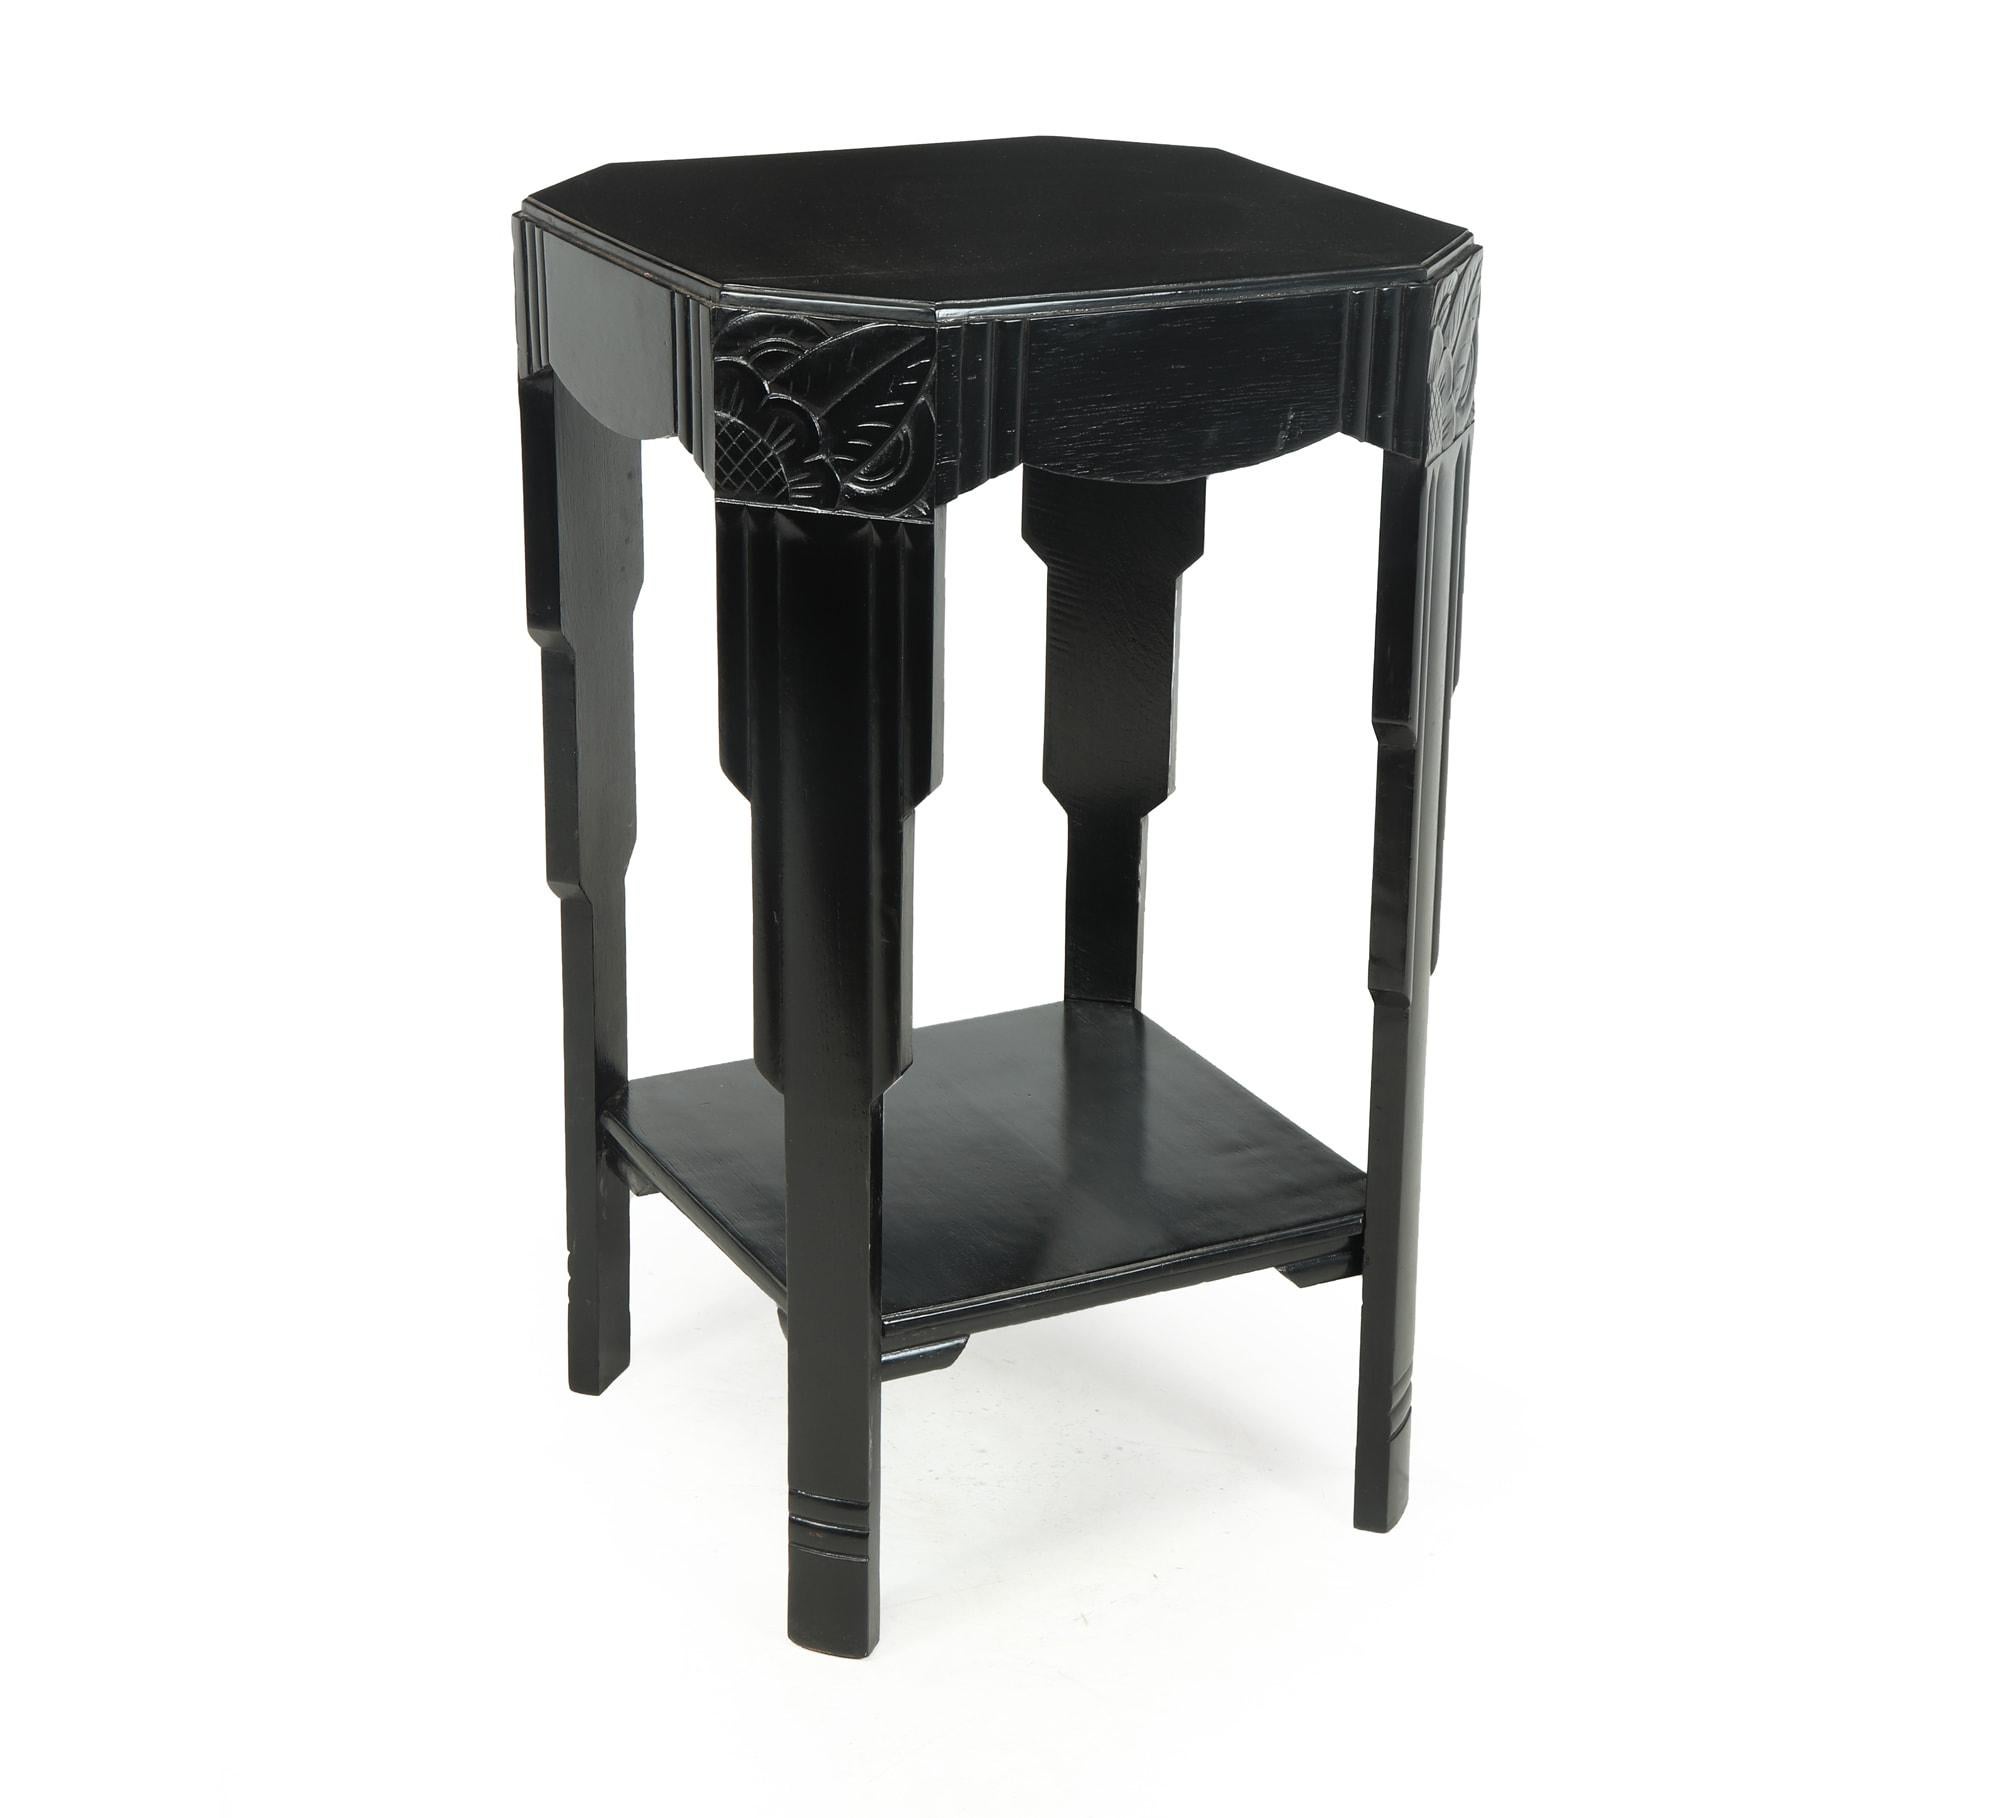 A very good looking art deco occasional side table, solid oak with ebonised piano lacquer finish. Stepped leg supports having carved detail at the top and a lower tier shelf. Newly re finished and polished in excellent condition throughout

Age: